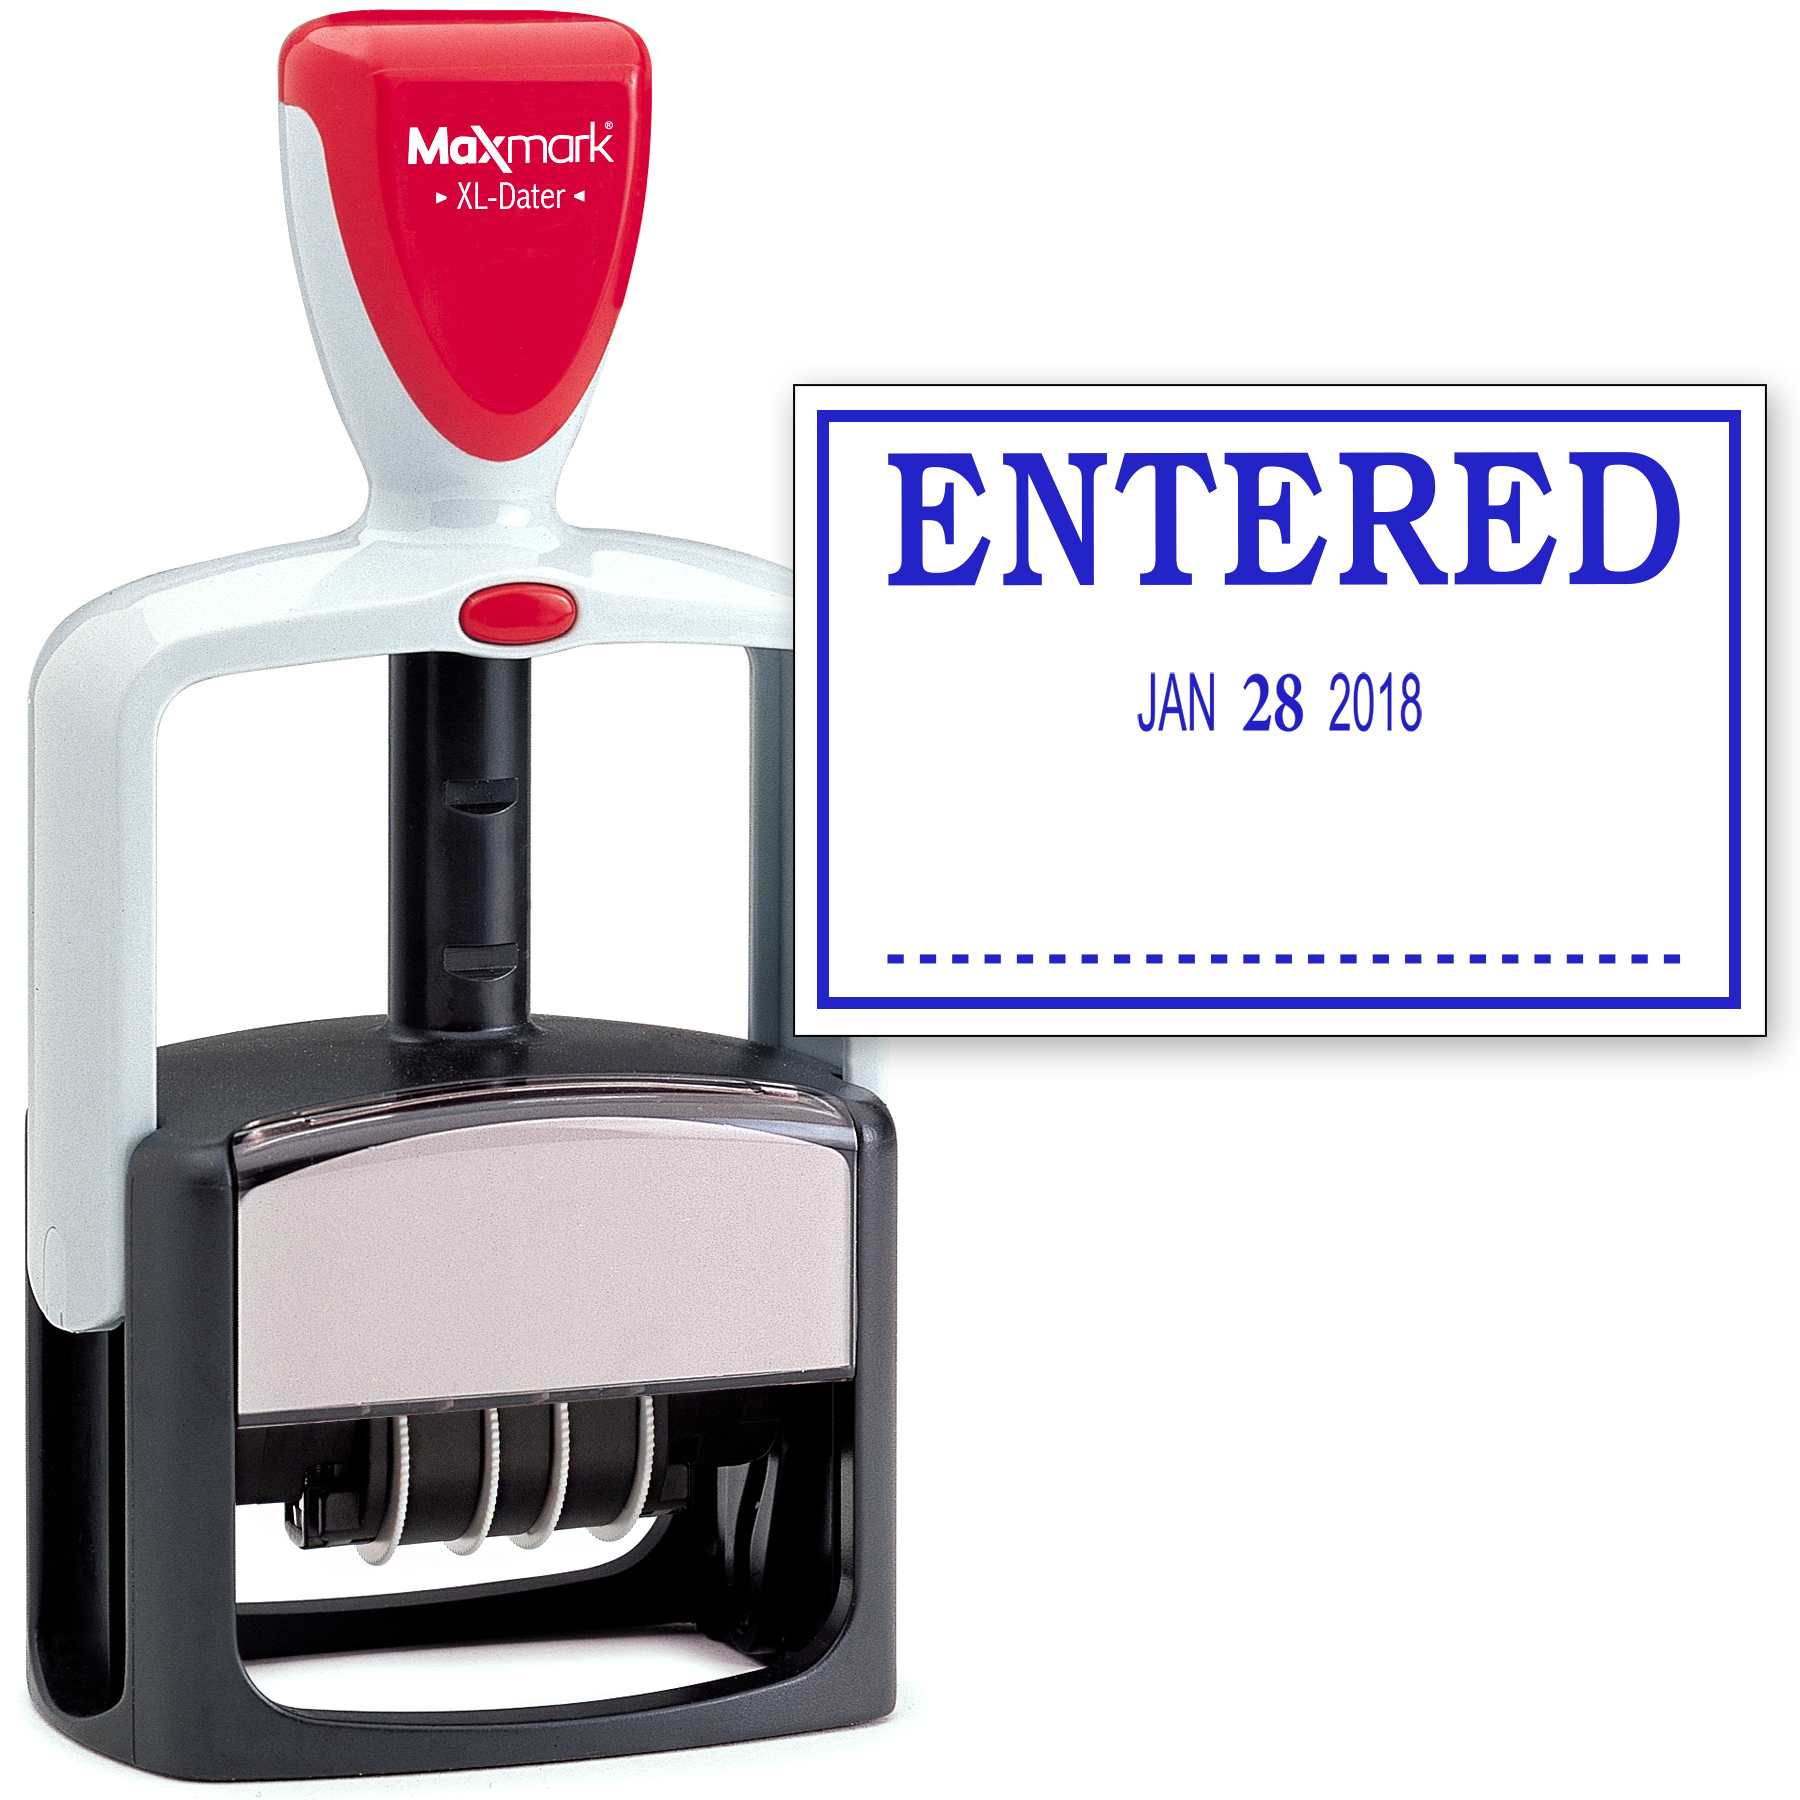 2000 PLUS Heavy Duty Style 2-Color Date Stamp with ENTERED self inking stamp - Blue Ink